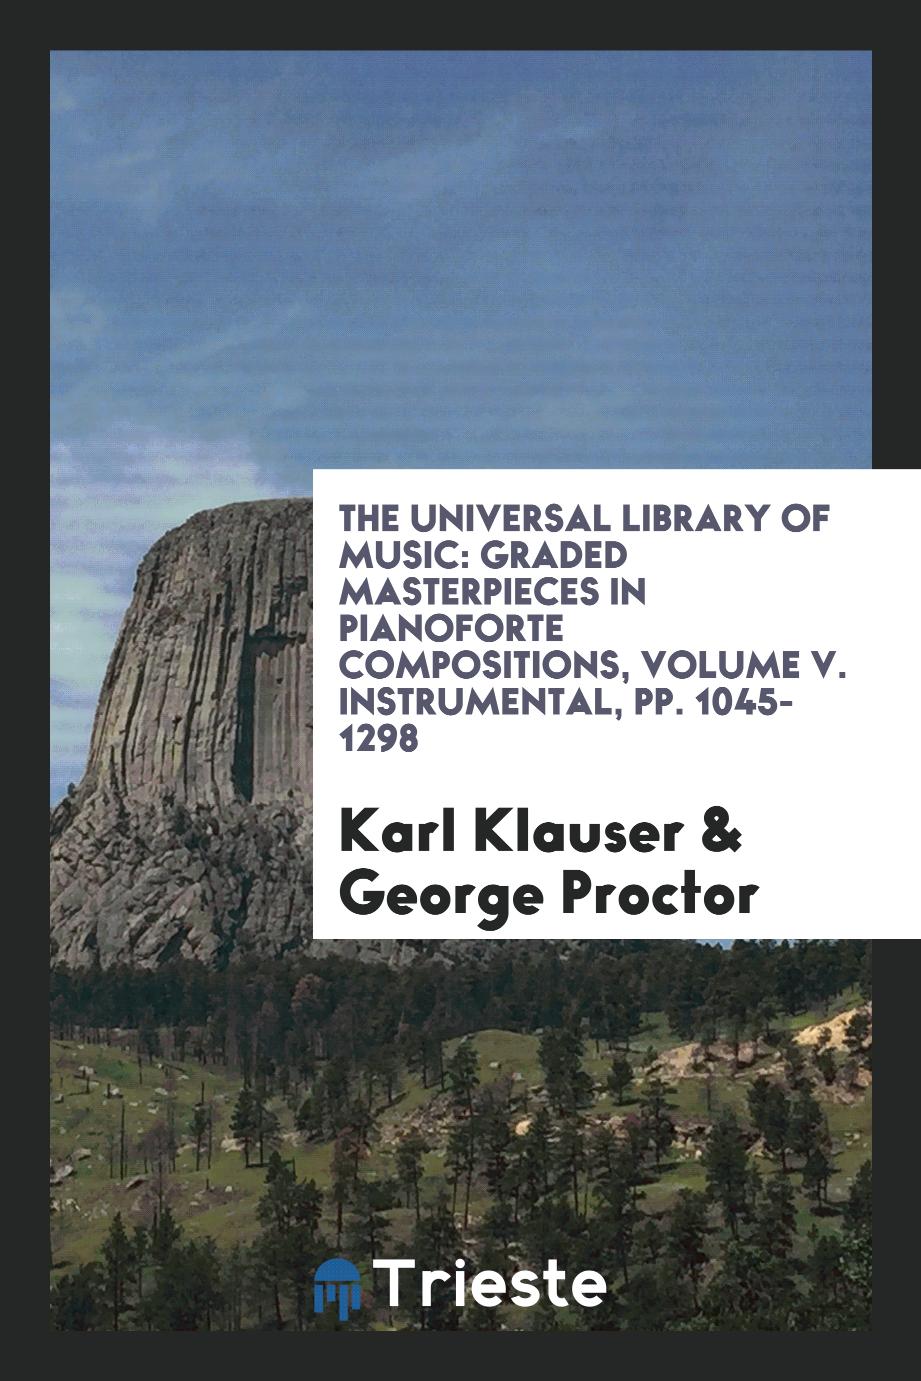 The Universal Library of Music: Graded Masterpieces in Pianoforte Compositions, Volume V. Instrumental, pp. 1045-1298